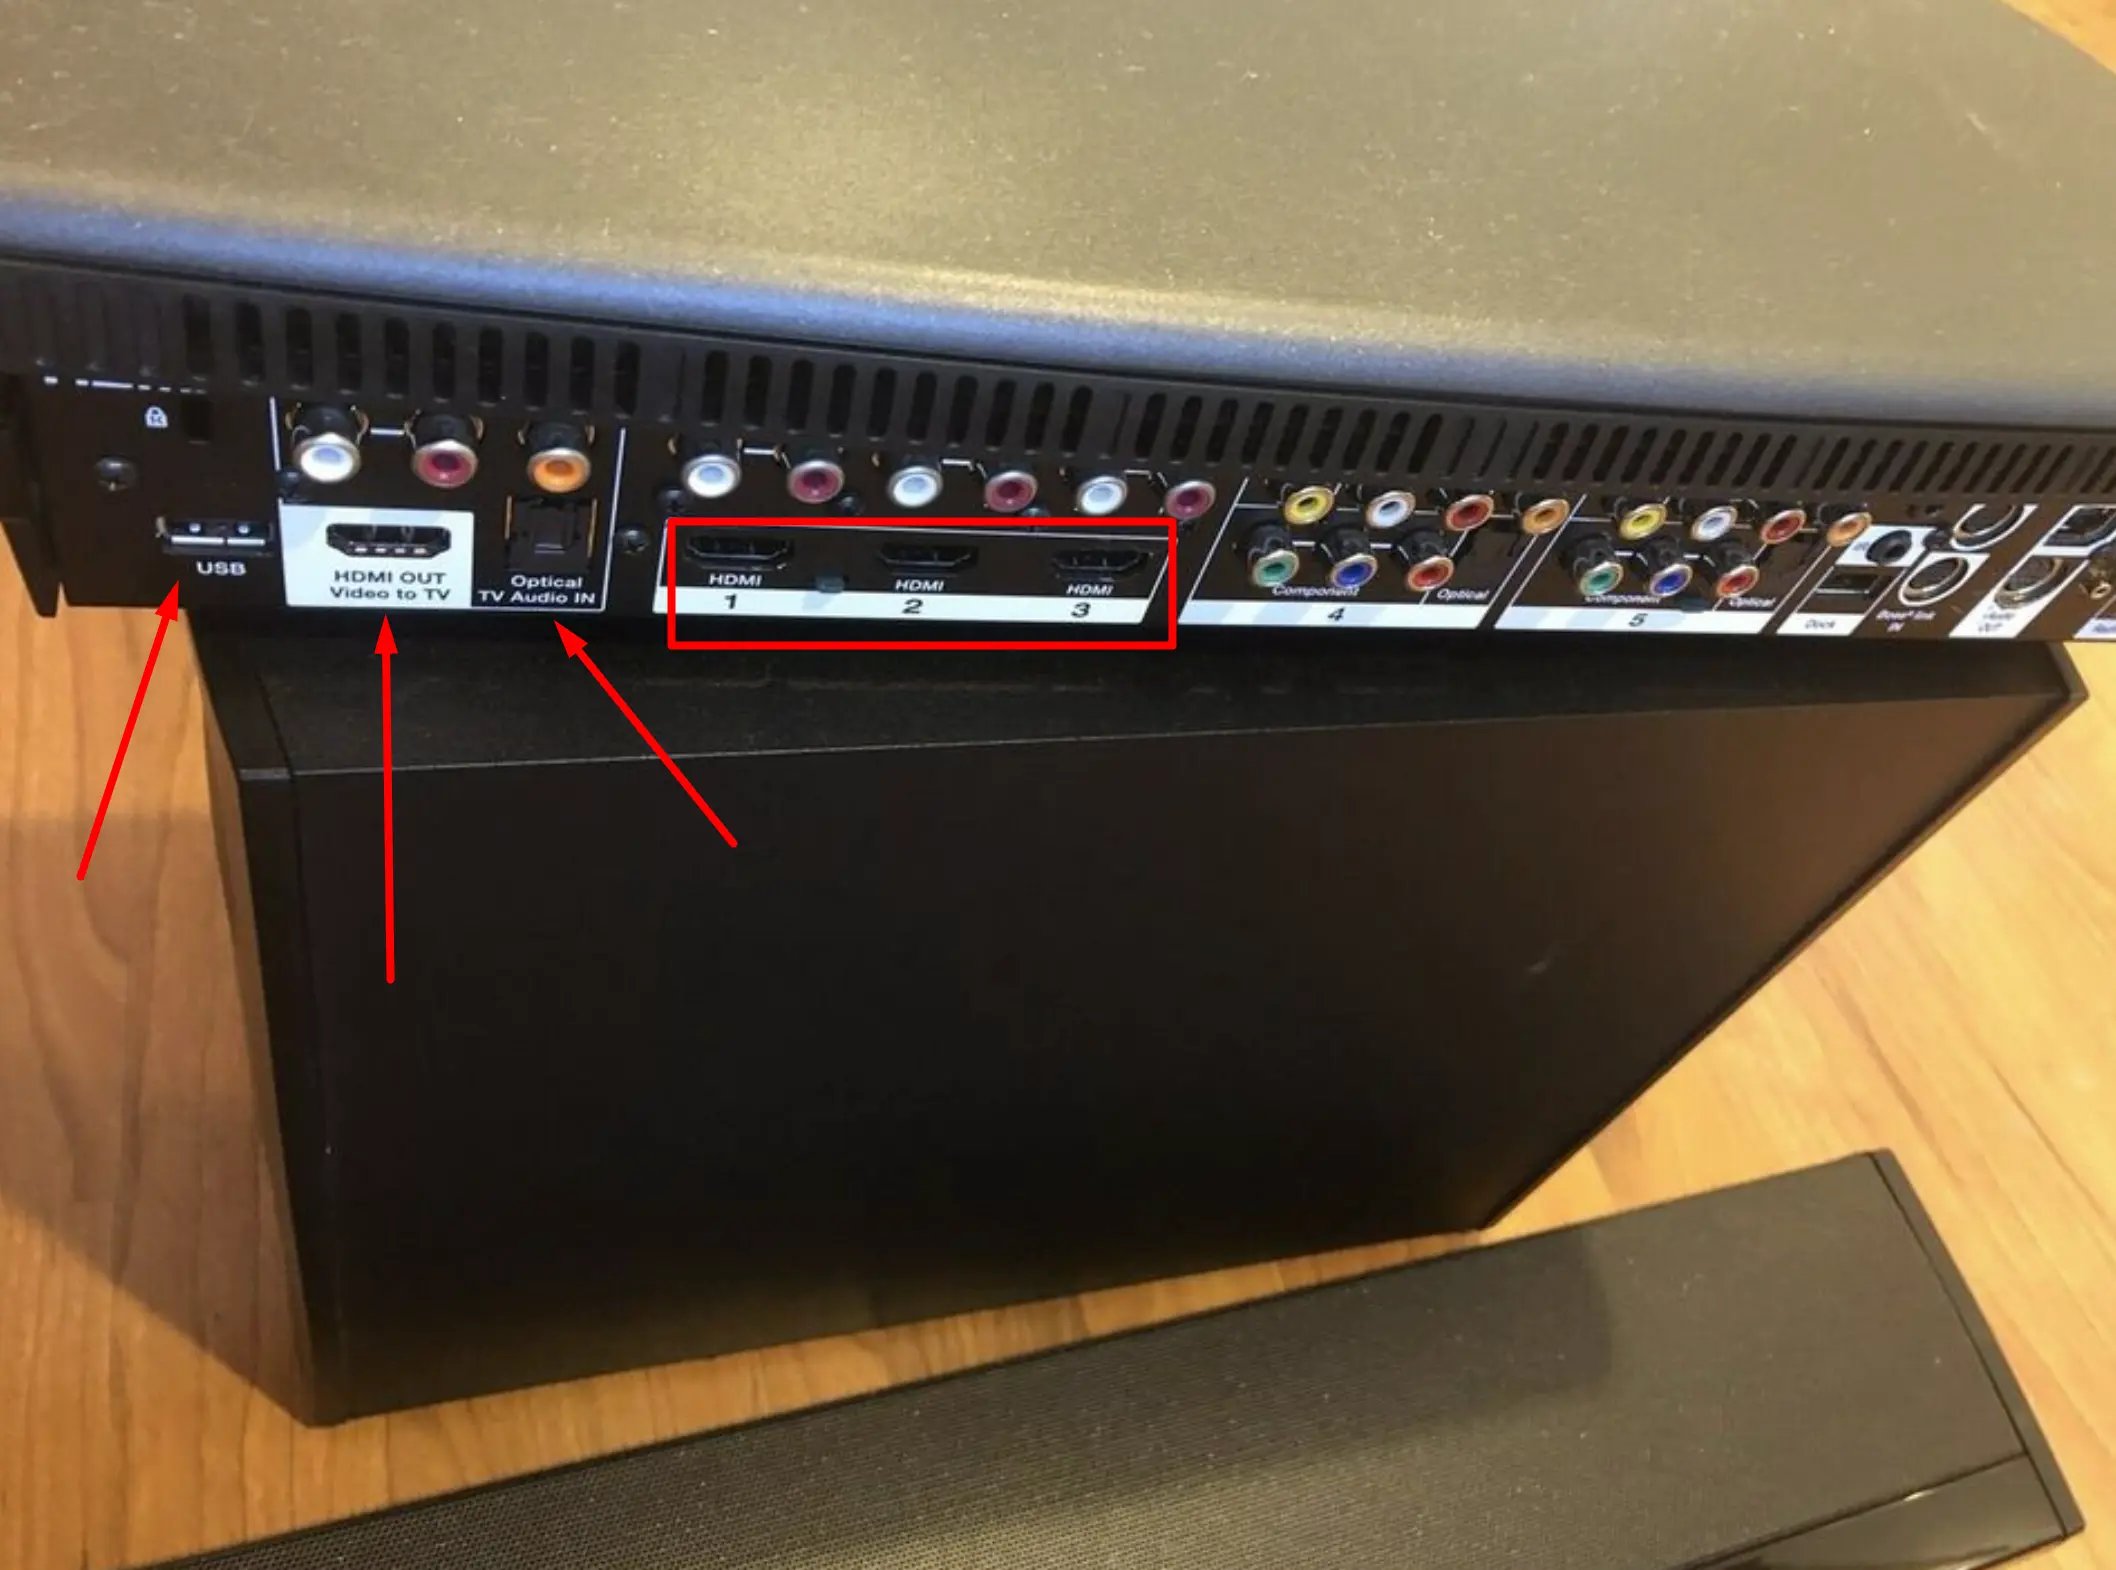 Bose cable connection ports